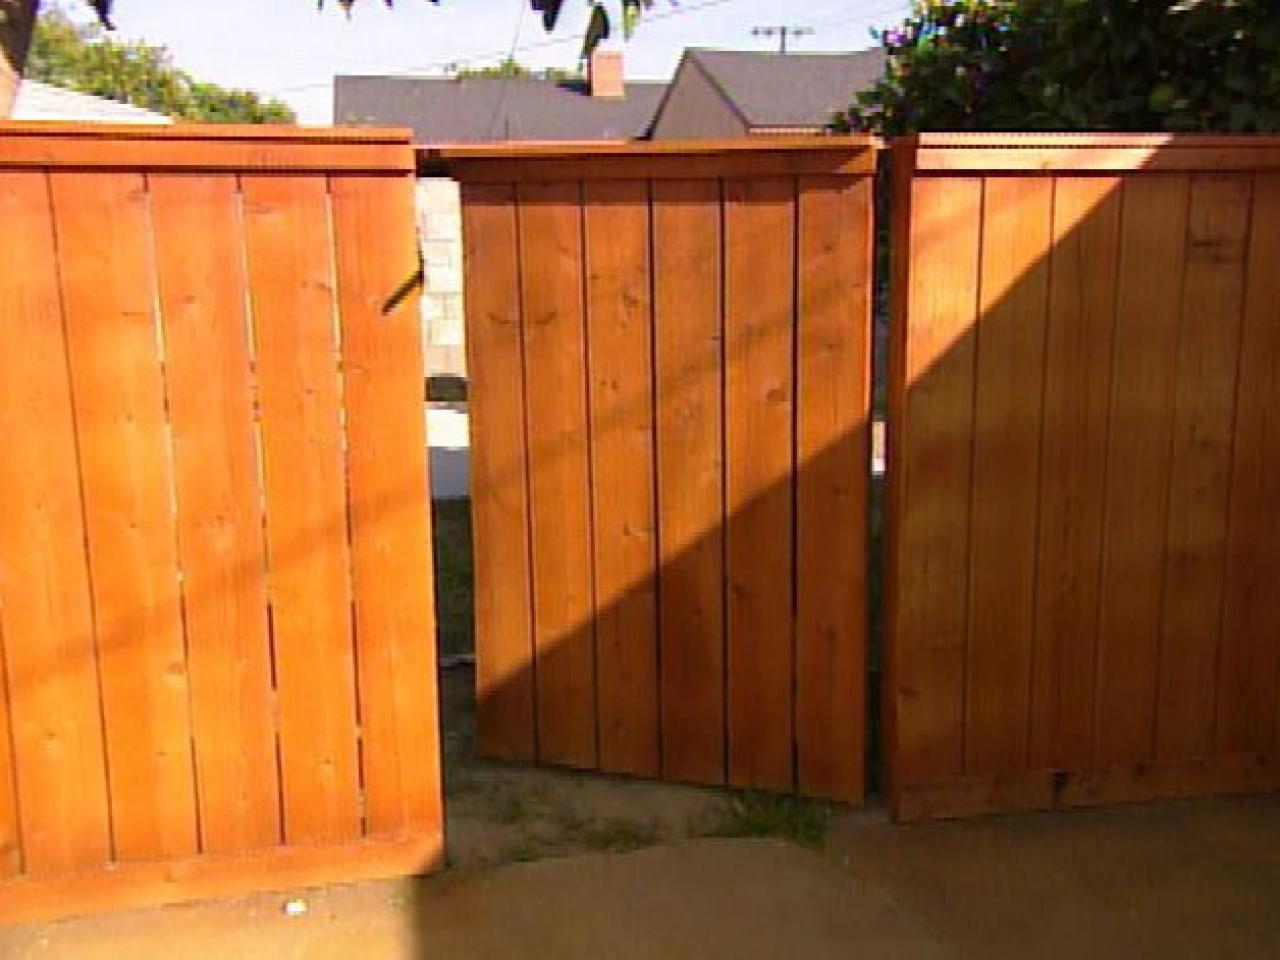 How to build a simple wooden gate